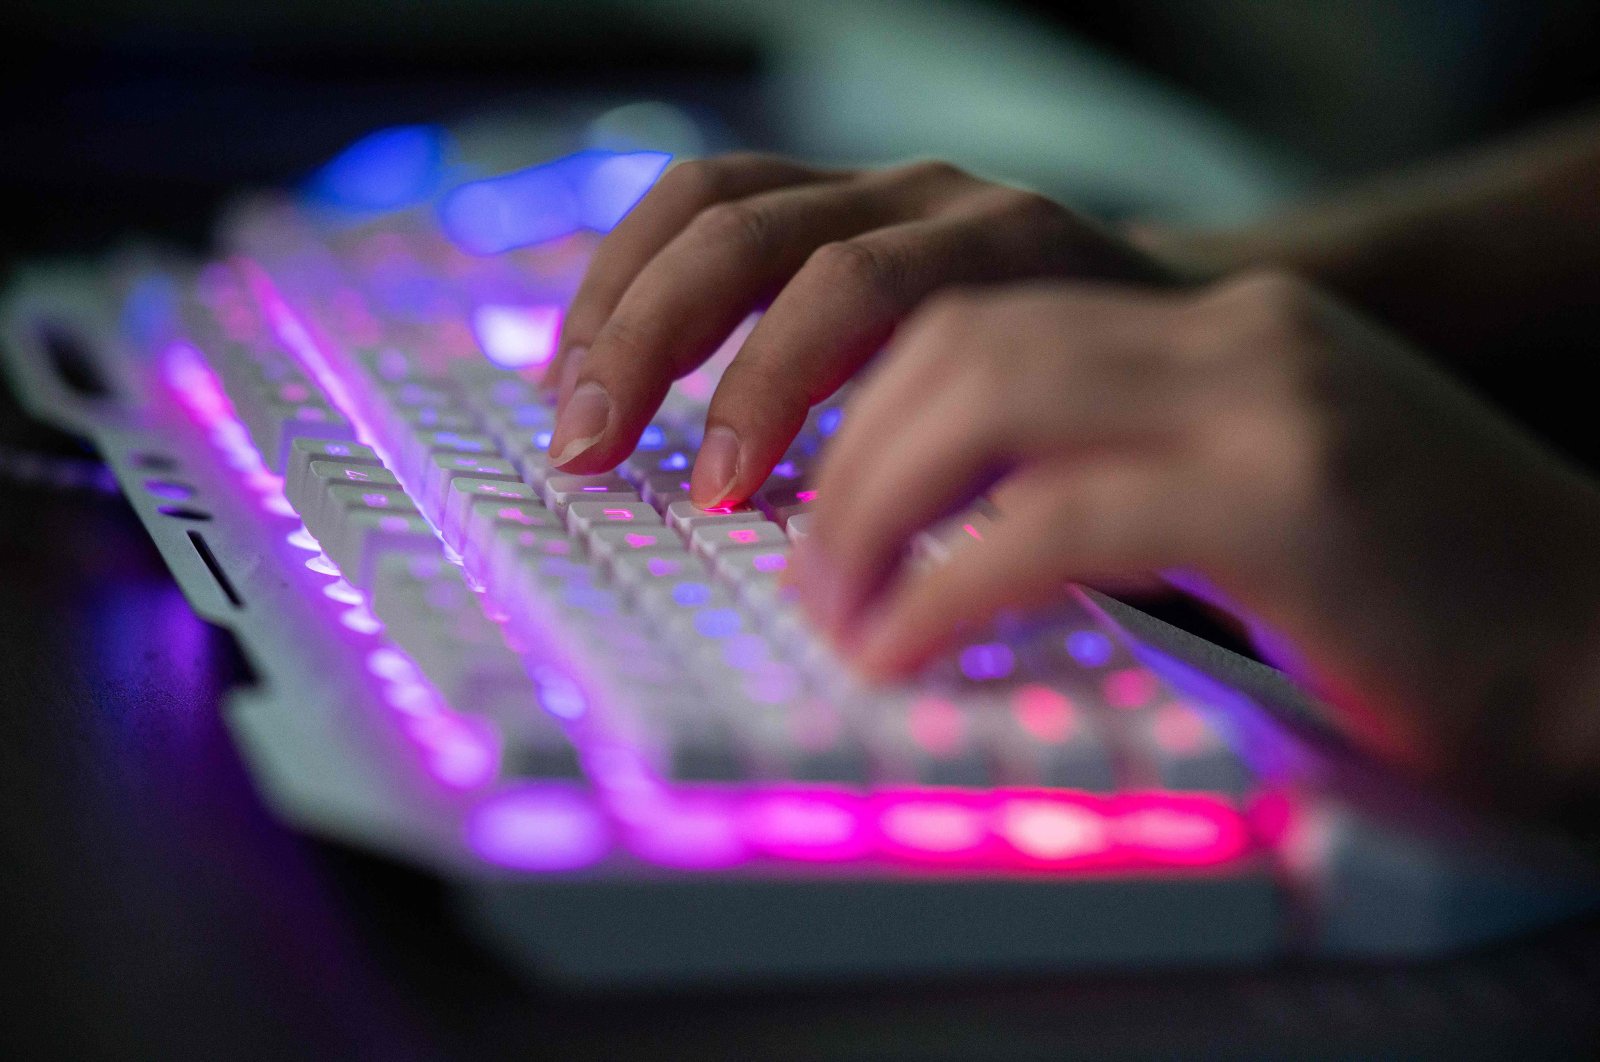 A member of the hacking group Red Hacker Alliance who refused to give his real name uses his computer at their office in Dongguan, southern Guangdong province, China, Aug. 04, 2020. (AFP Photo)